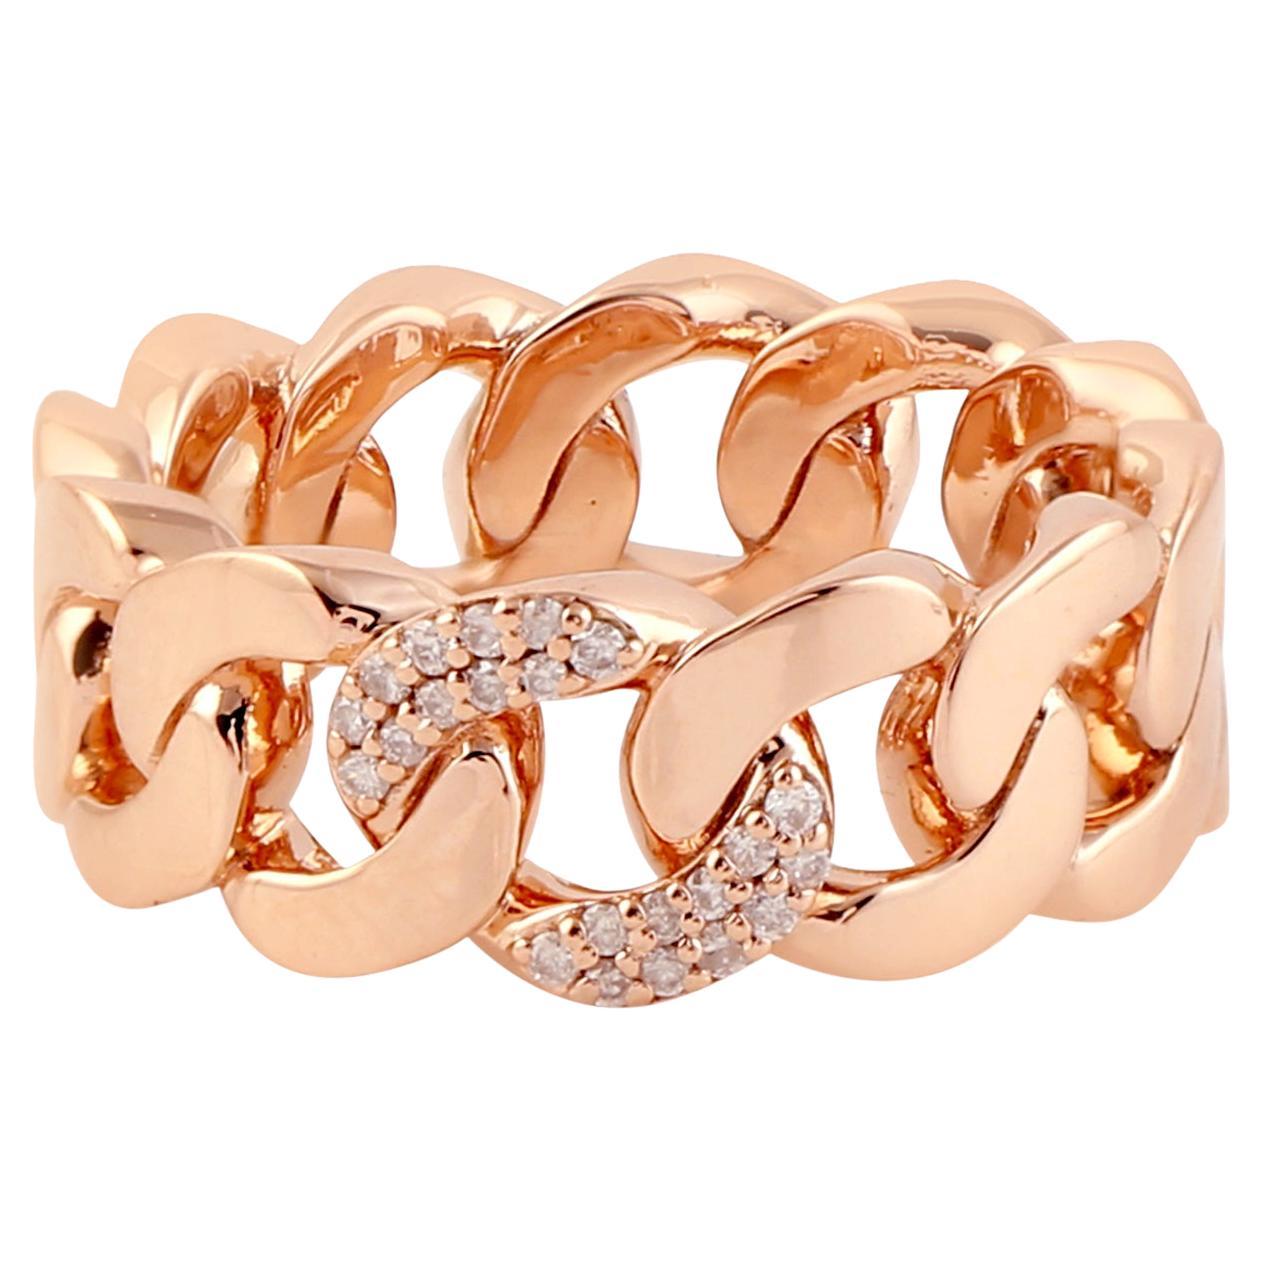 Cuban Chain Knotted Design Band Ring WIth Diamonds In 18k Gold For Sale